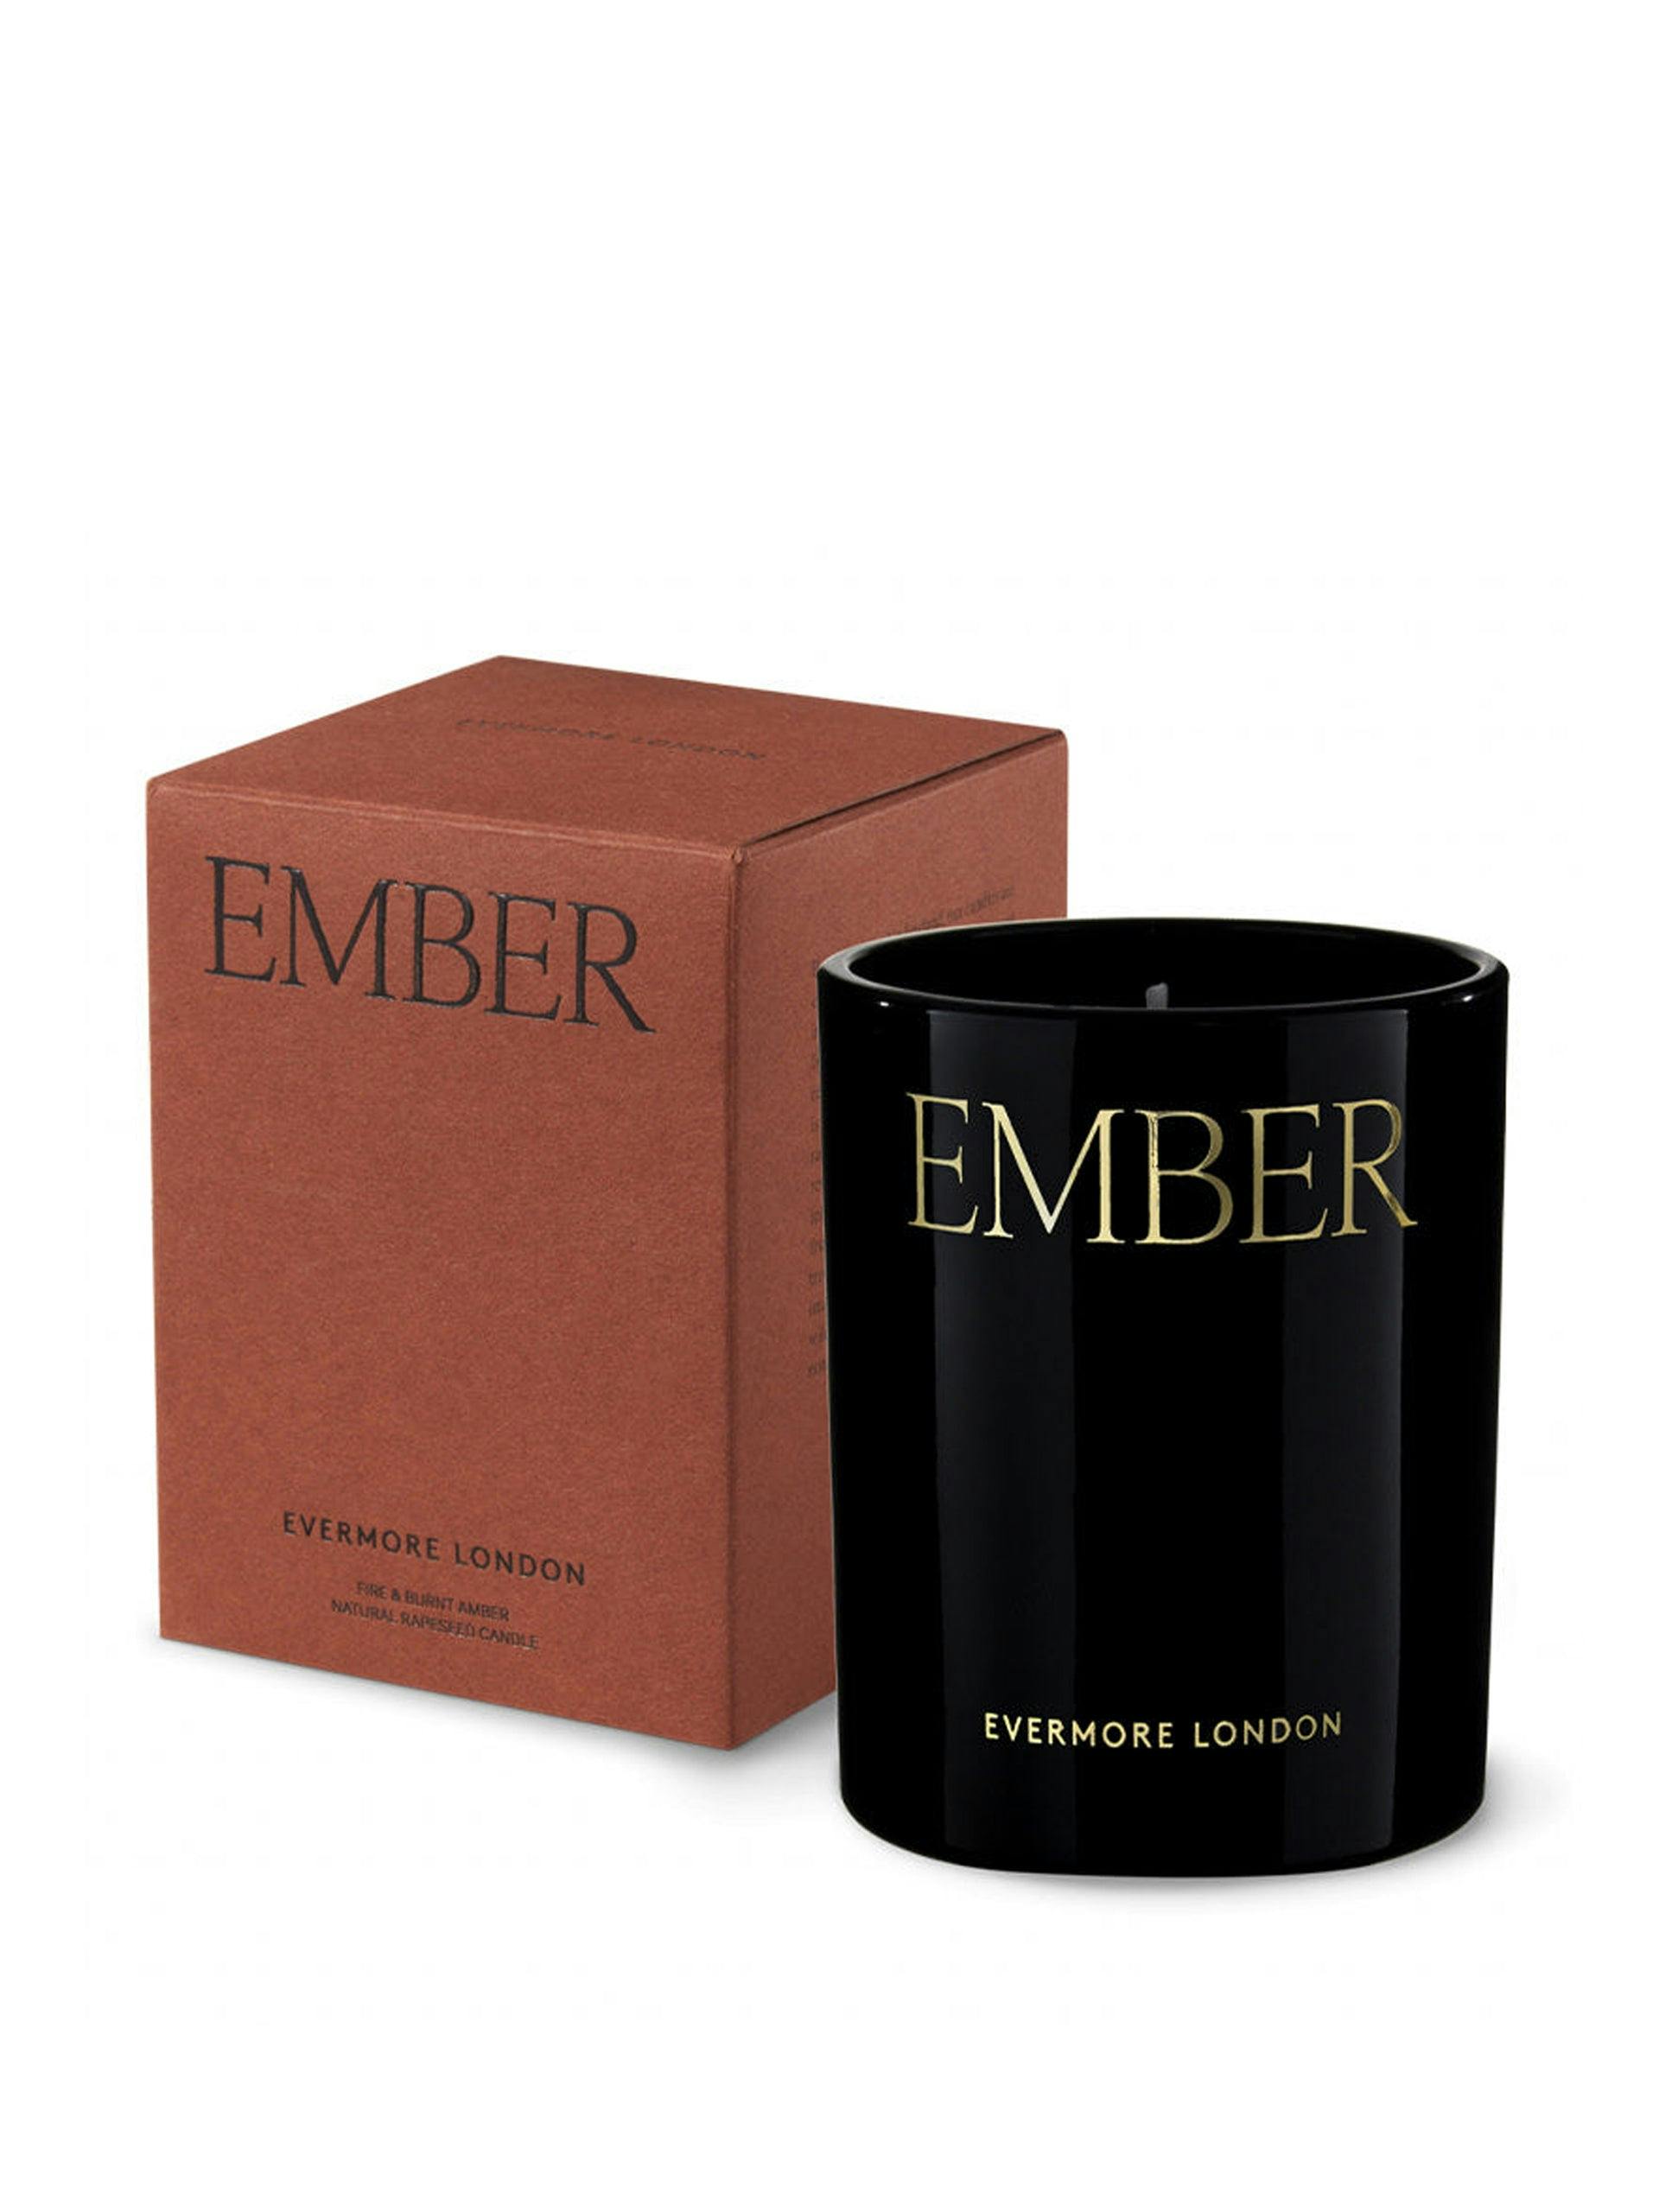 Ember scented candle